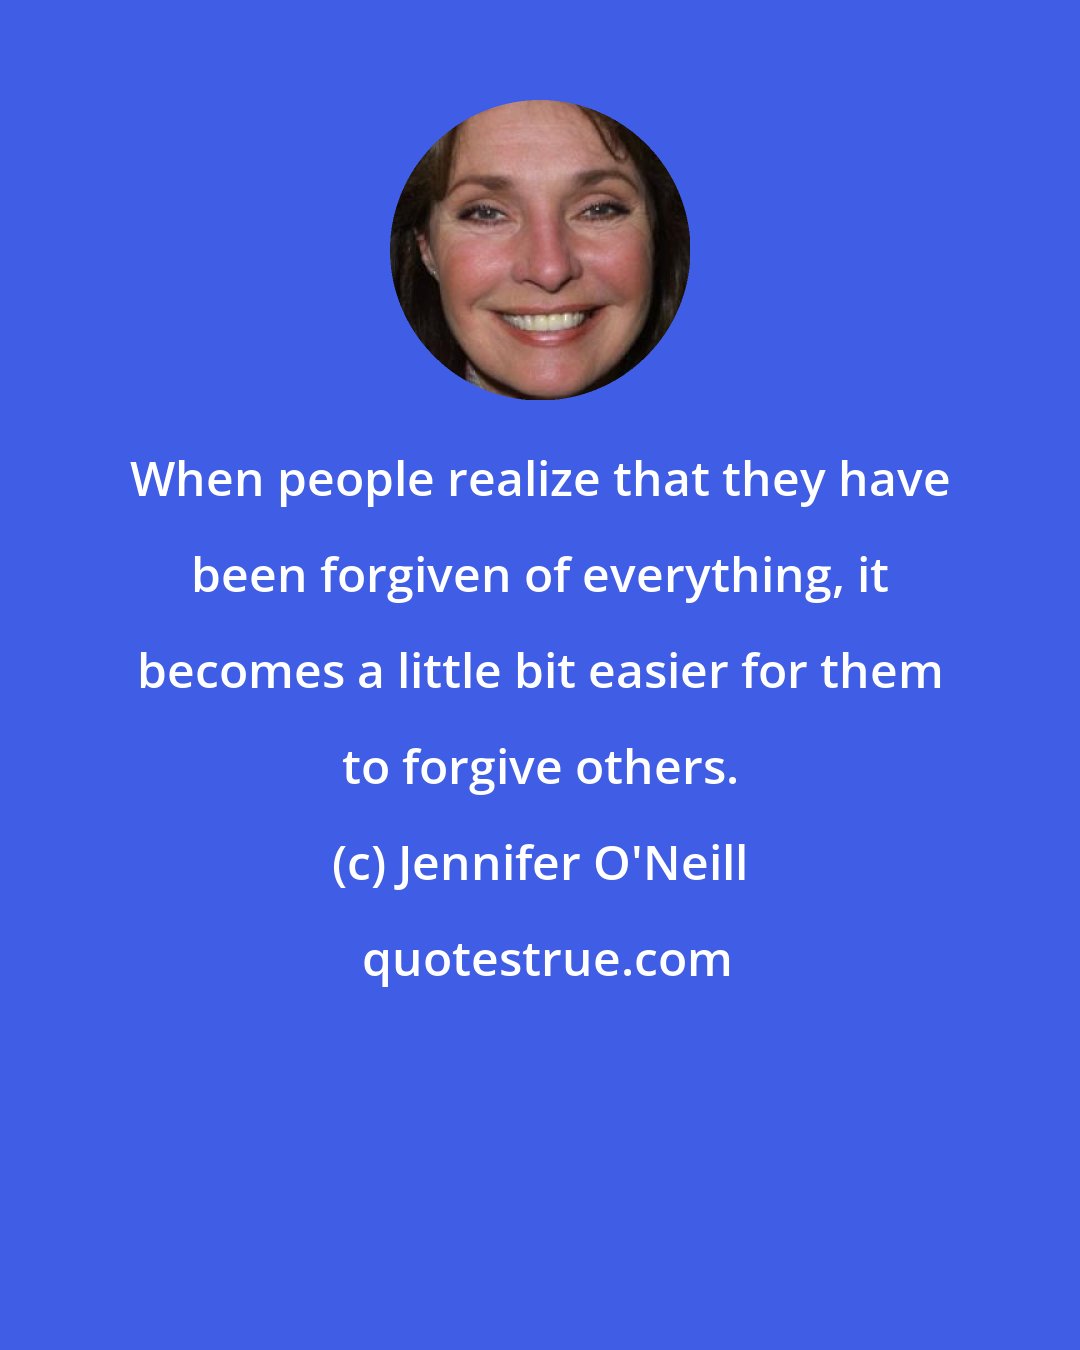 Jennifer O'Neill: When people realize that they have been forgiven of everything, it becomes a little bit easier for them to forgive others.